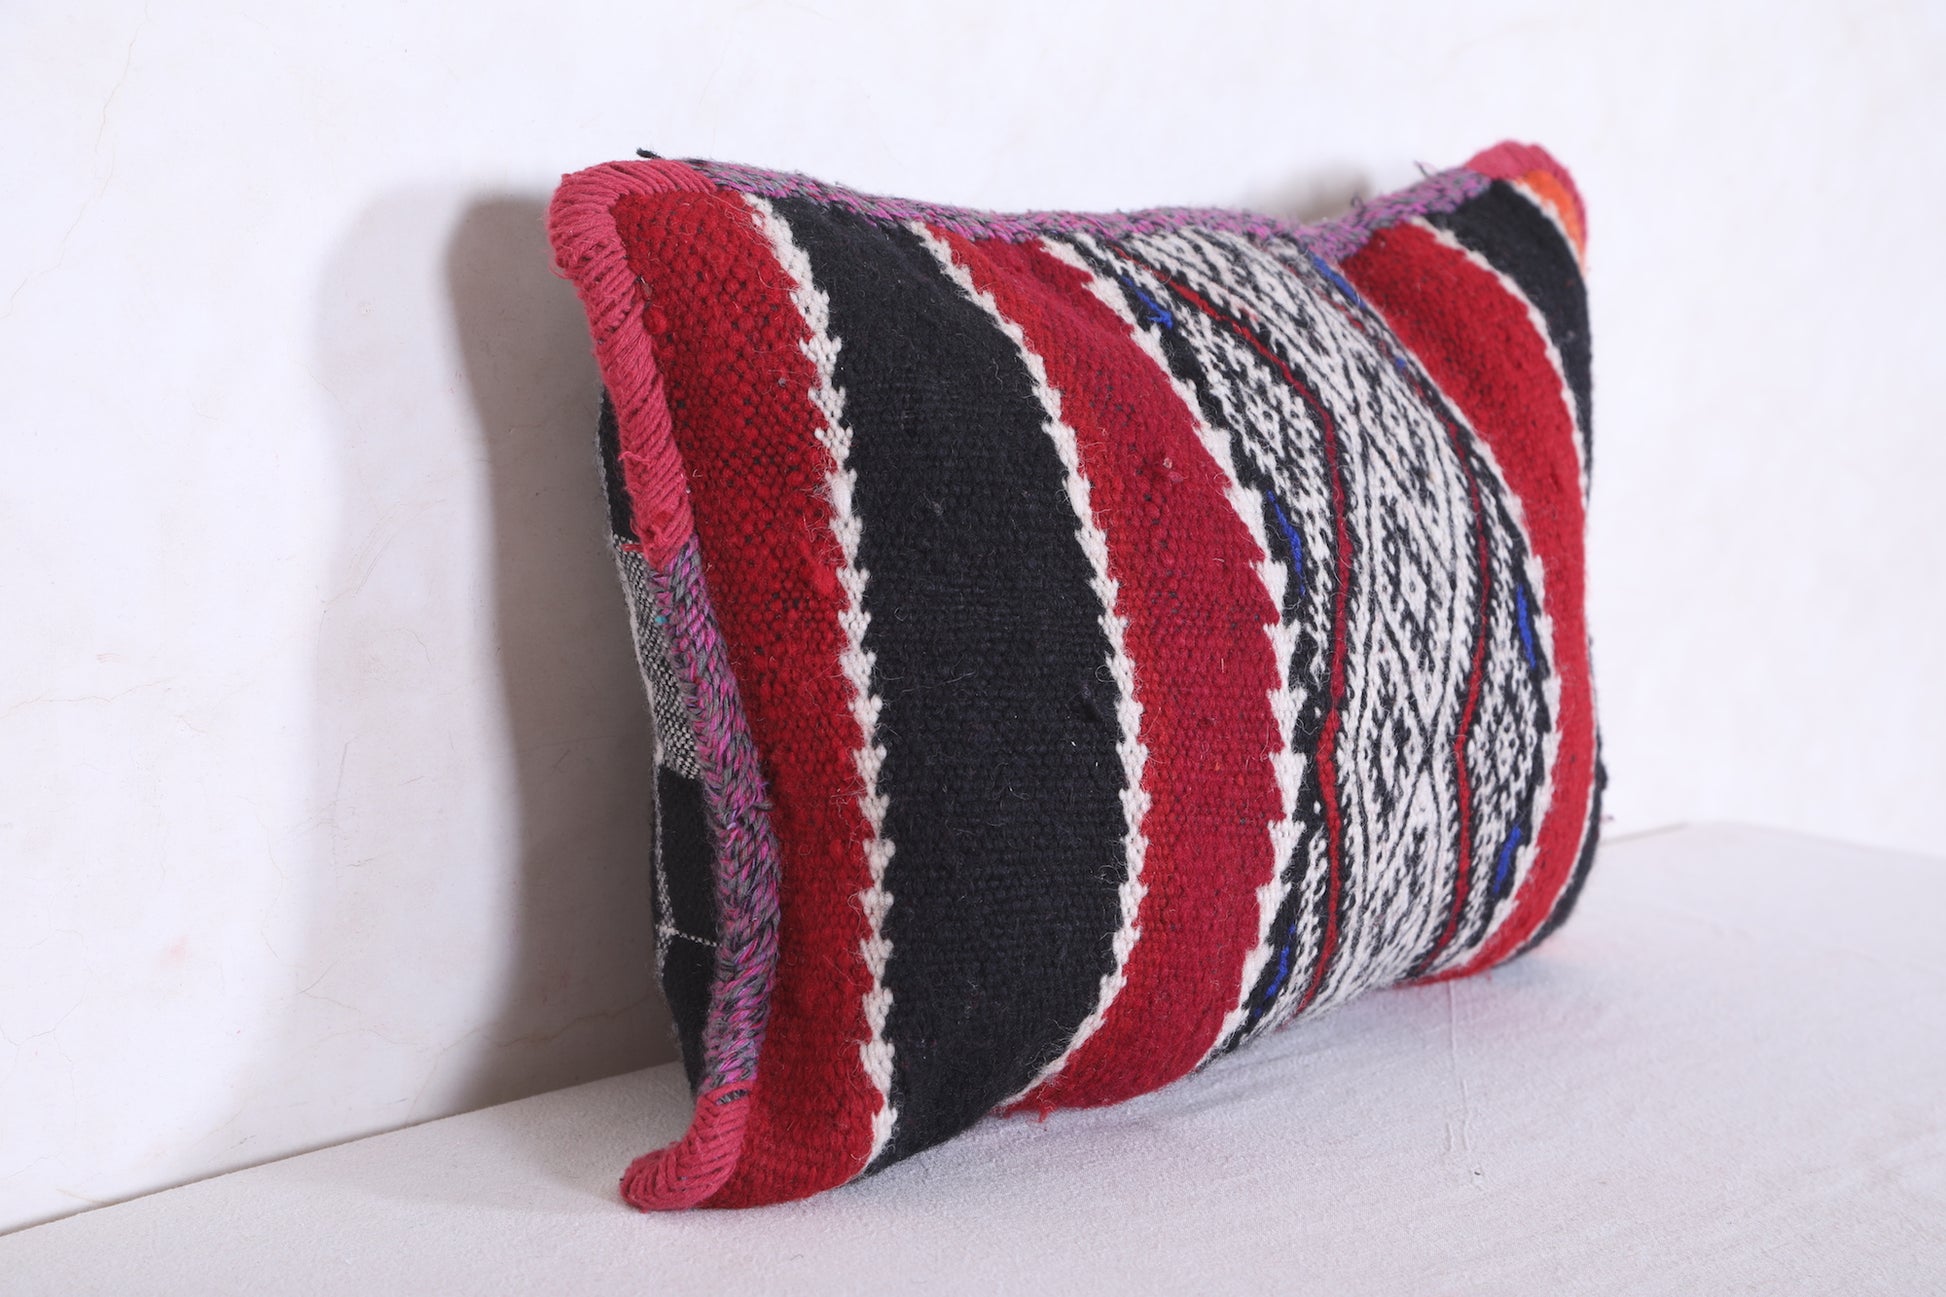 Moroccan handmade kilim pillow 14.9 INCHES X 21.6 INCHES